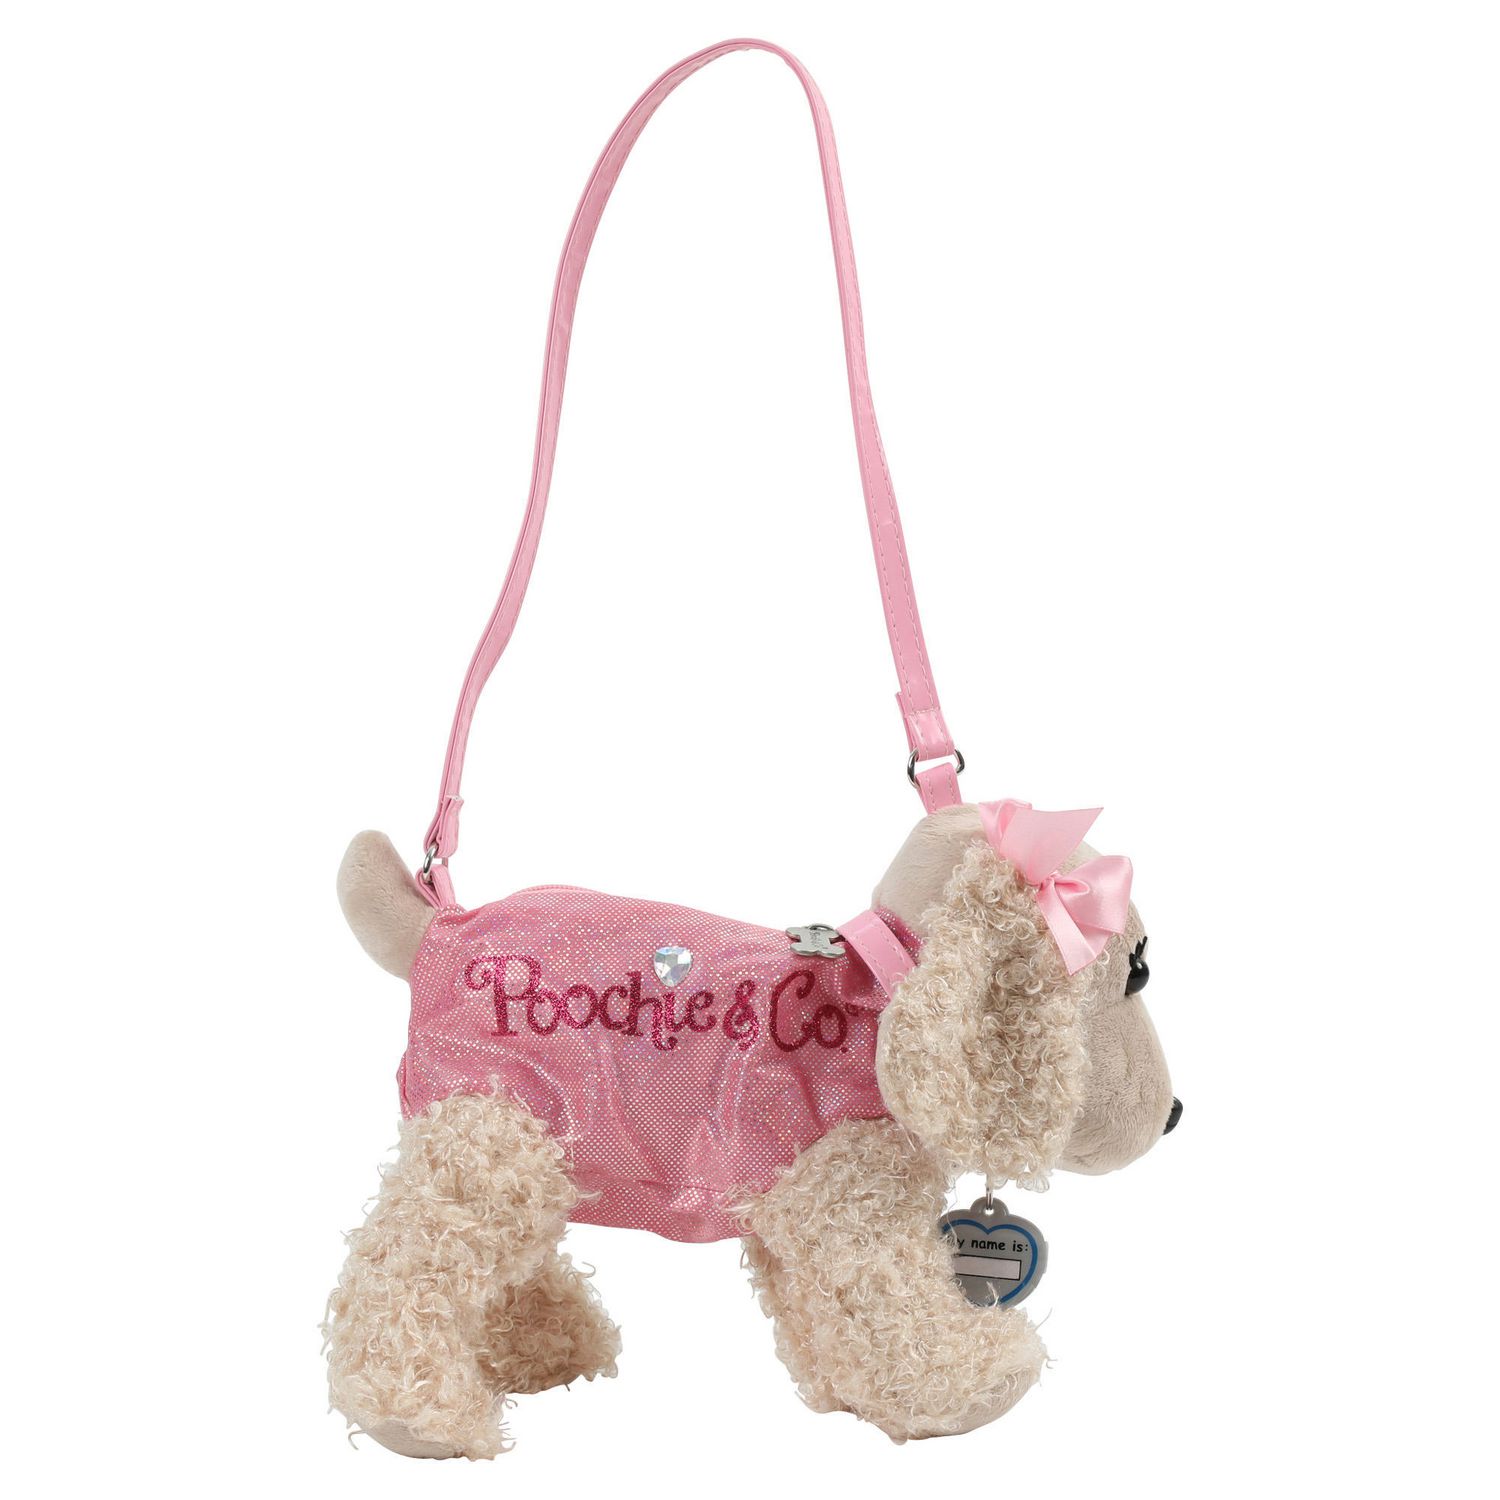 Poochie & Co. Plush Dog Purse - French Bulldog with Hot Pink Clothes/Hearts  : Amazon.com.au: Clothing, Shoes & Accessories